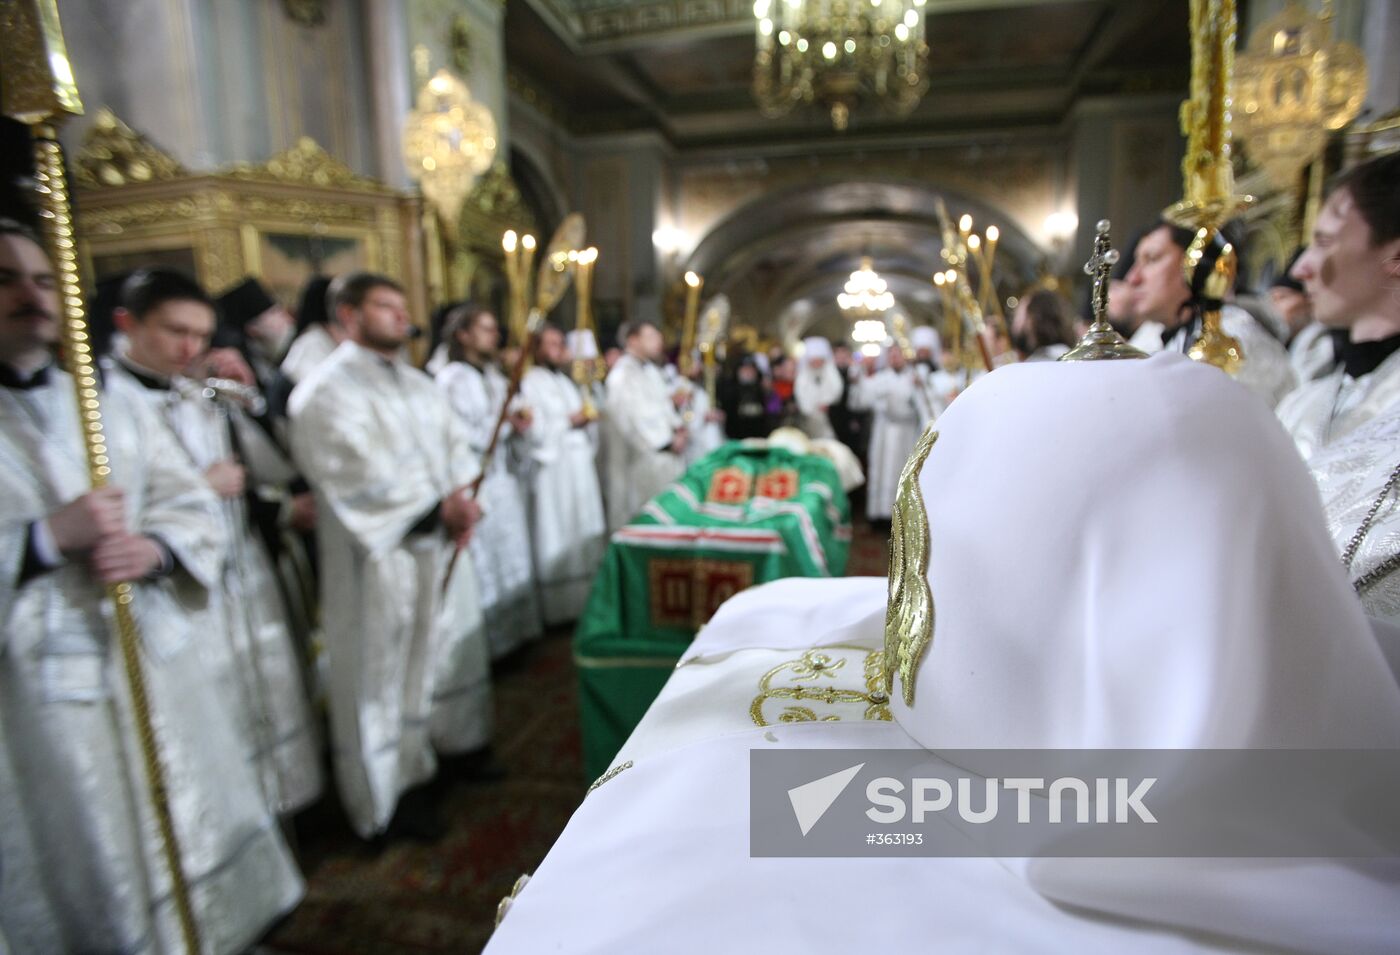 Funeral service for Patriarch Alexy II